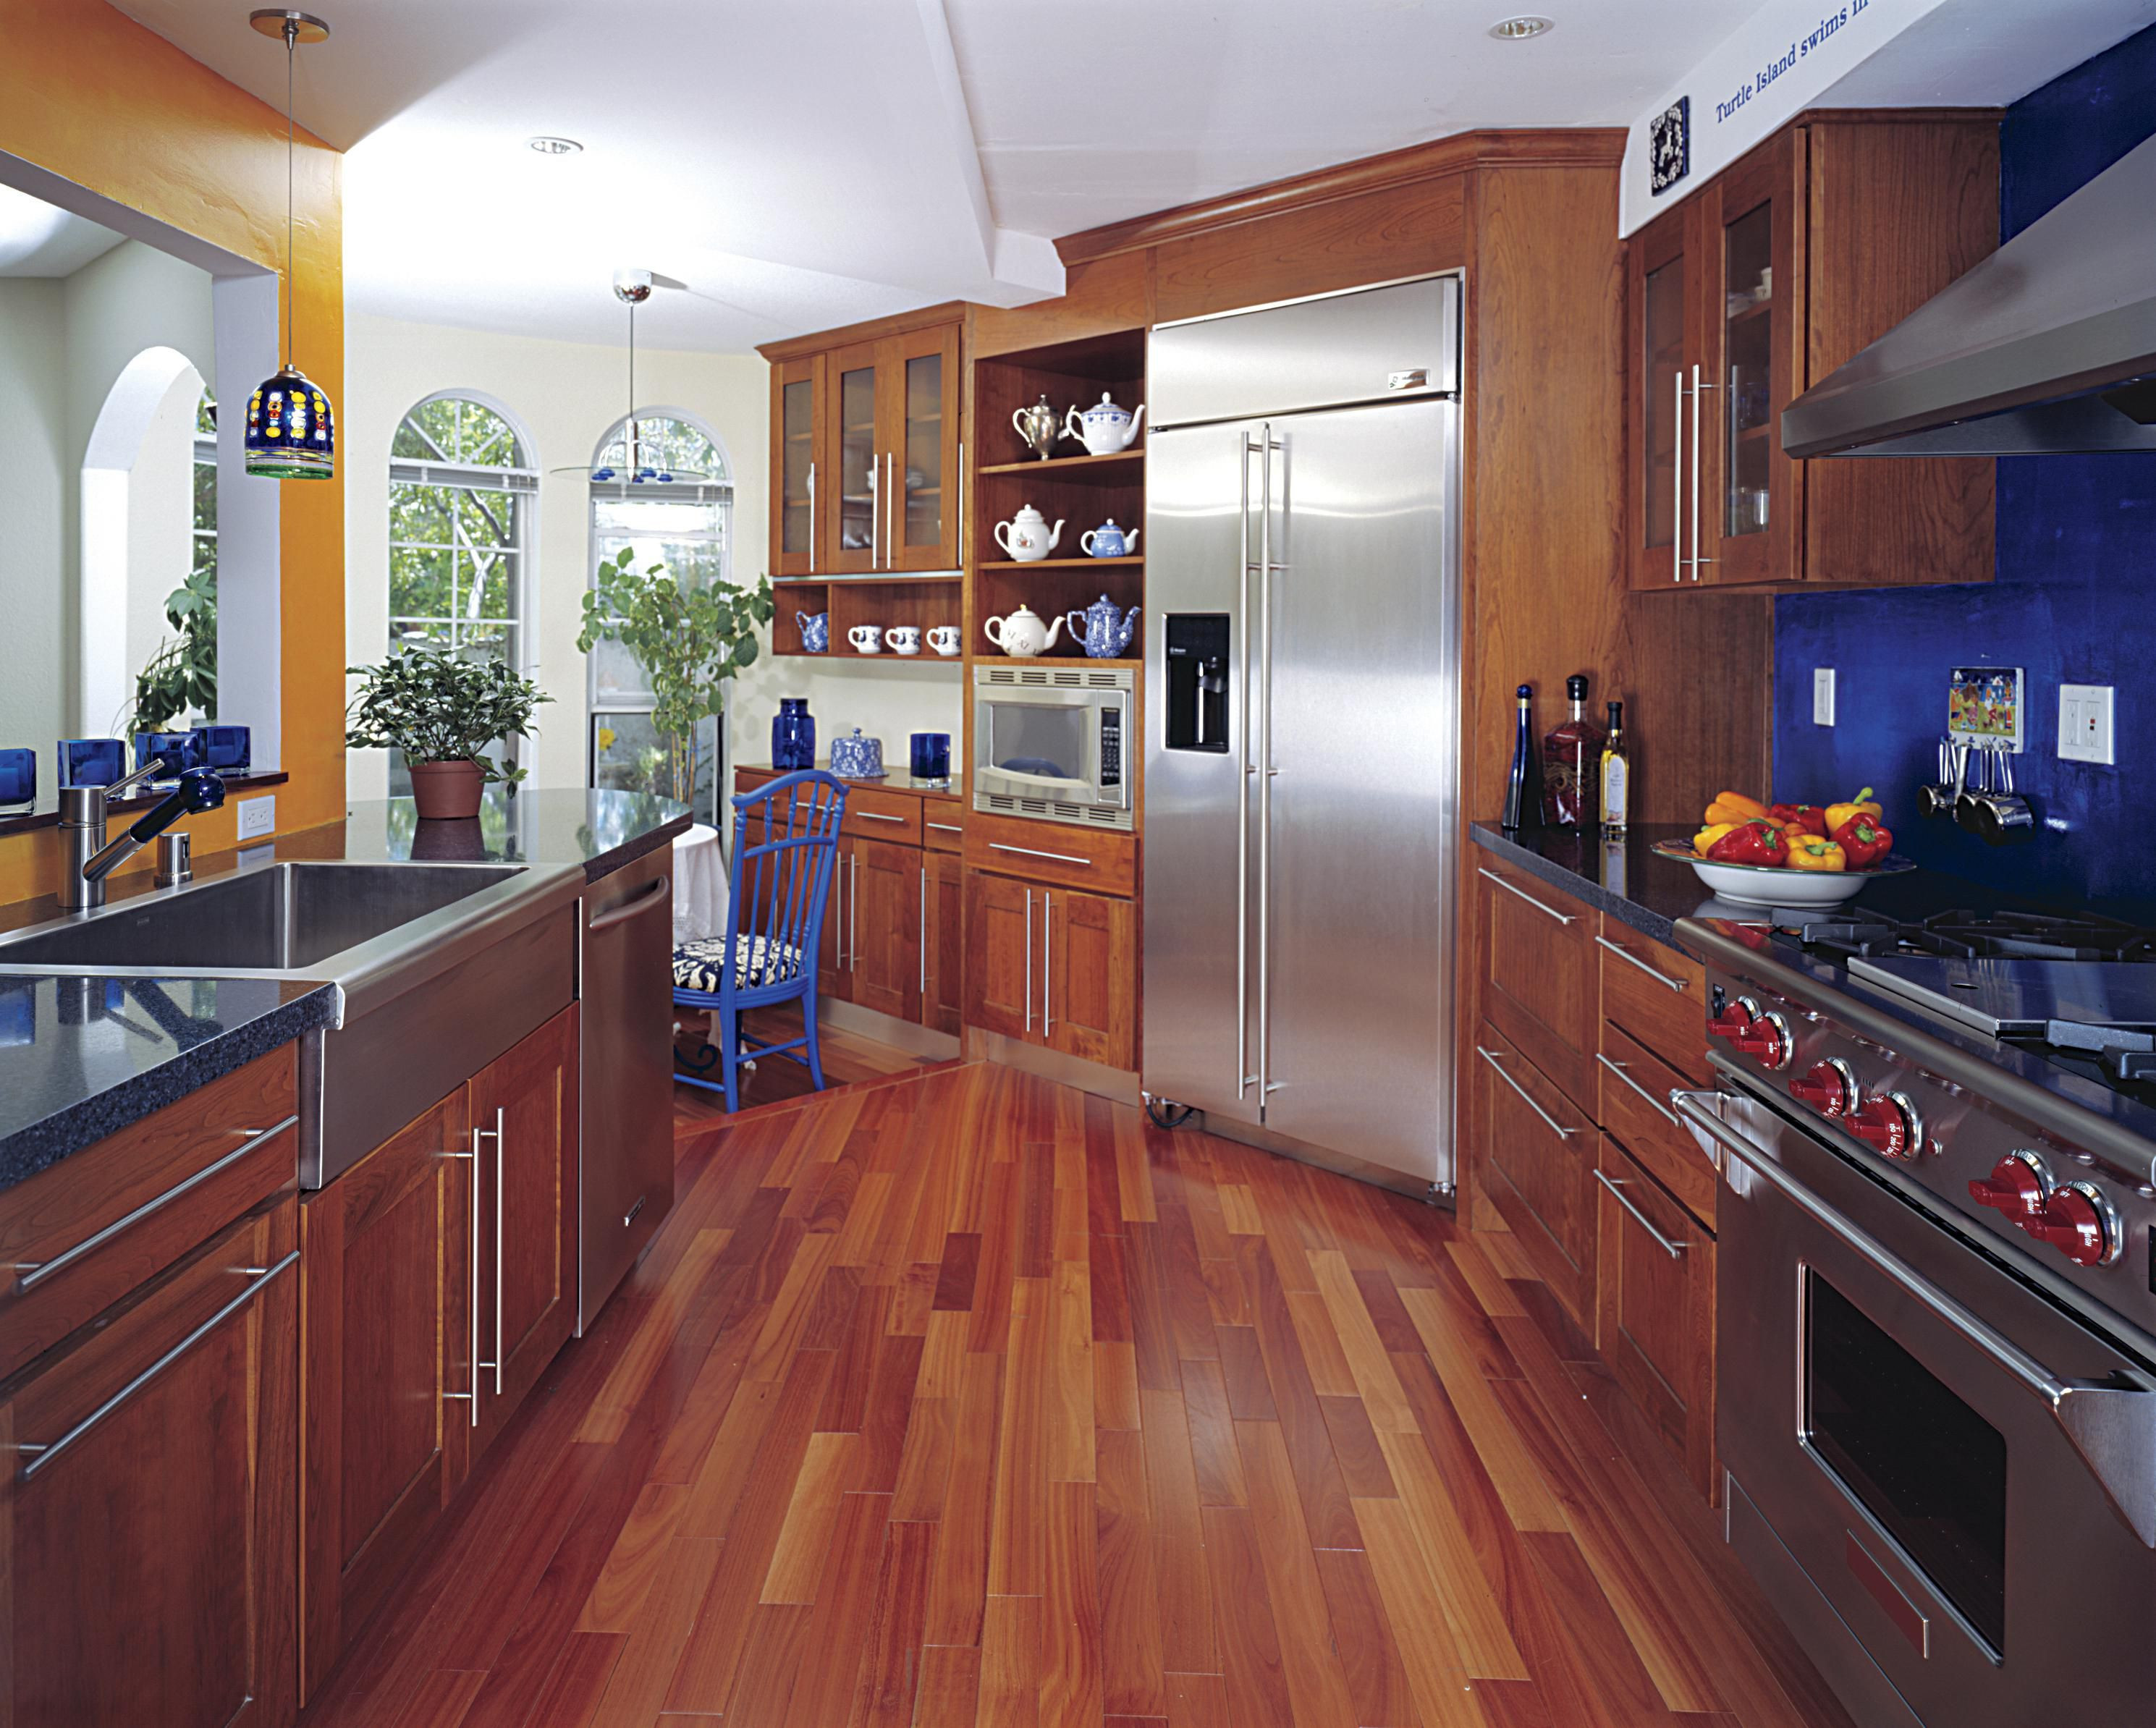 21 Lovable Hardwood Flooring Job Description 2024 free download hardwood flooring job description of hardwood floor in a kitchen is this allowed inside 186828472 56a49f3a5f9b58b7d0d7e142